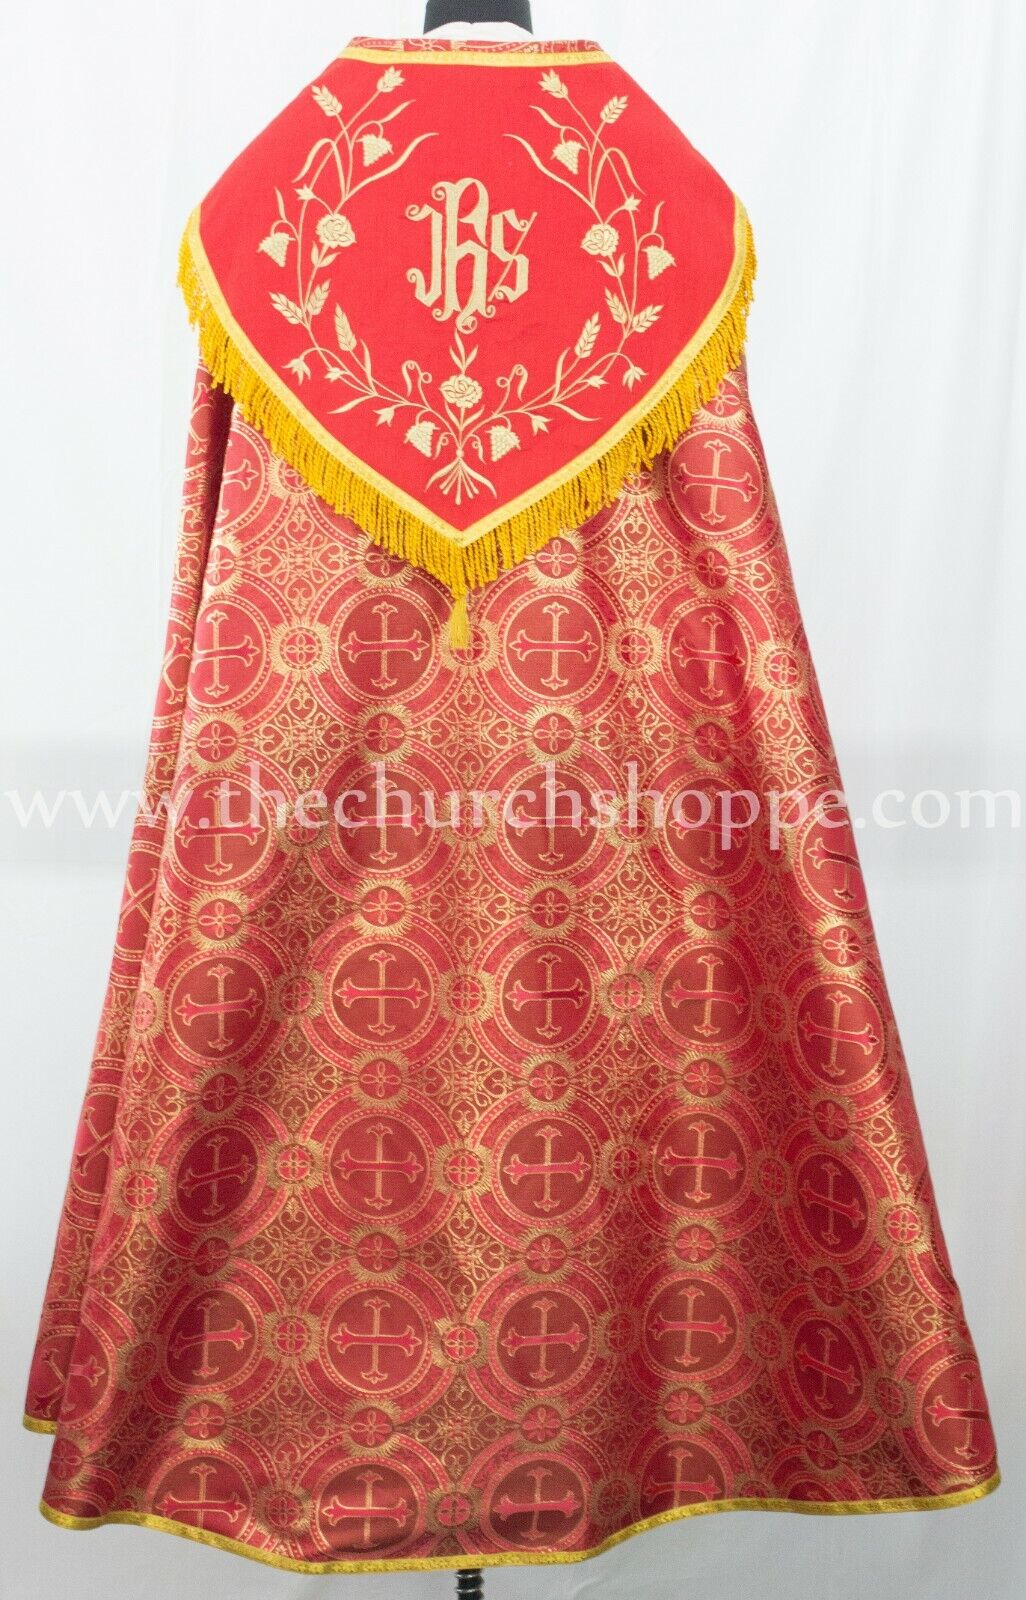 Metallic Red Cope & Stole Set with IHS embroidery,capa pluvial,far fronte